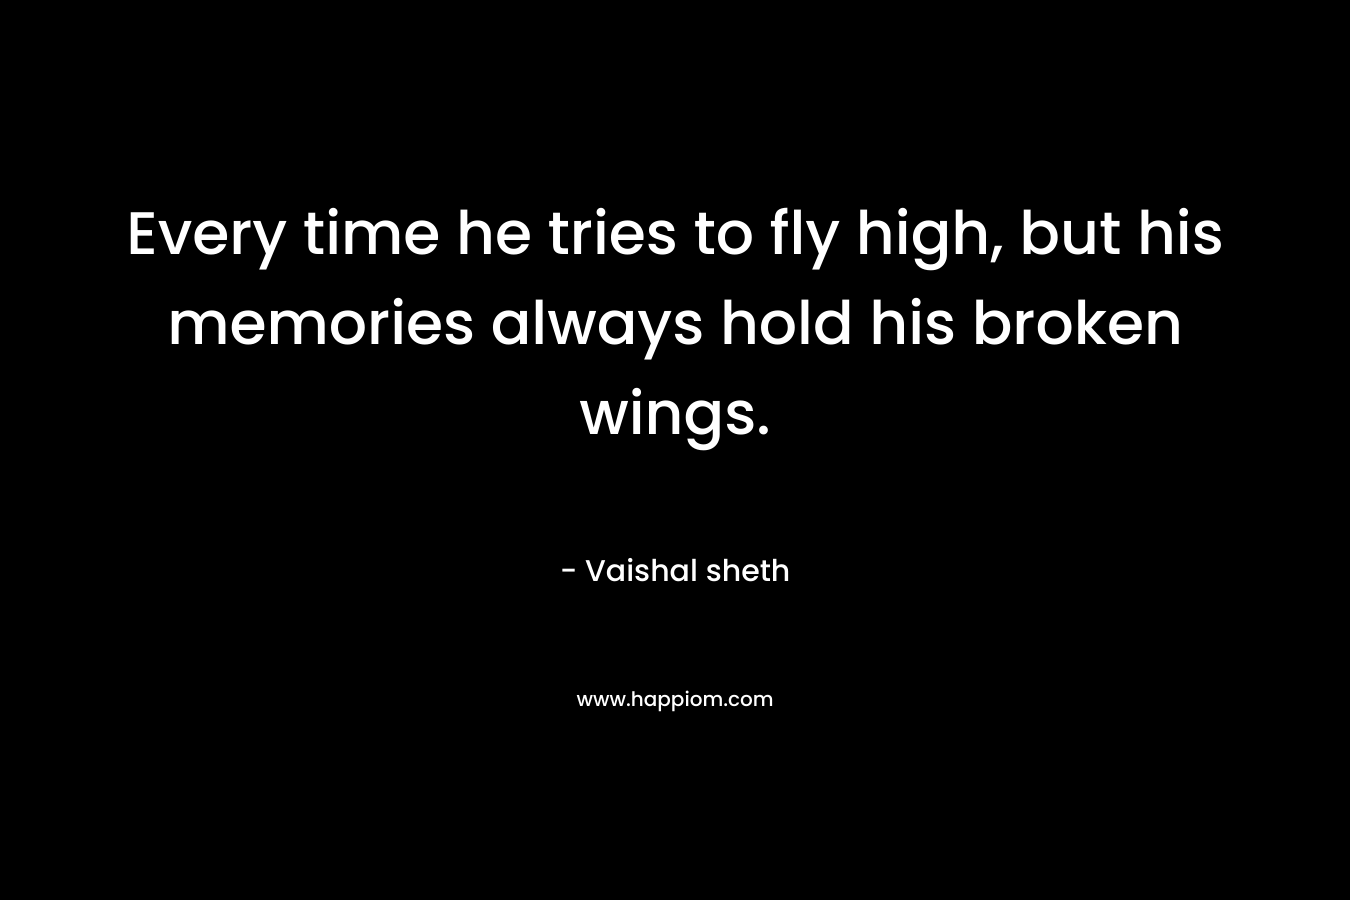 Every time he tries to fly high, but his memories always hold his broken wings.